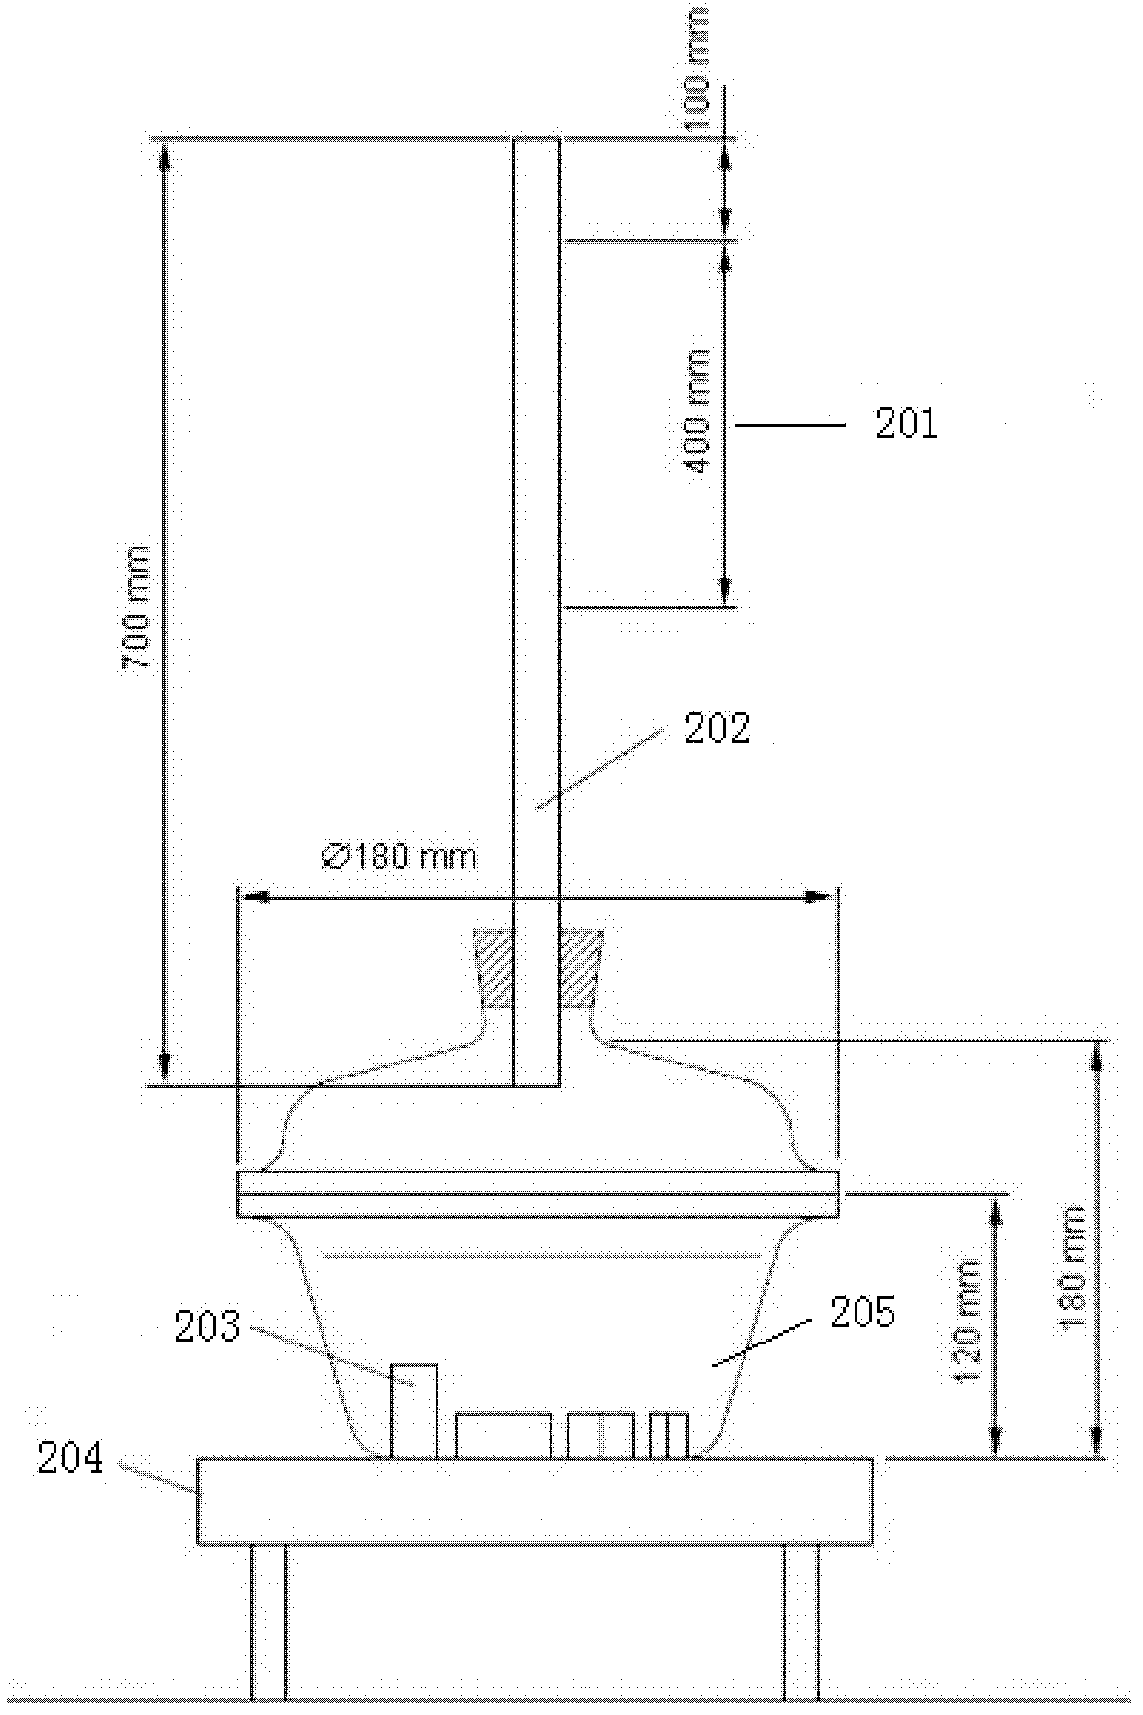 Method and system for detecting composite insulator interface